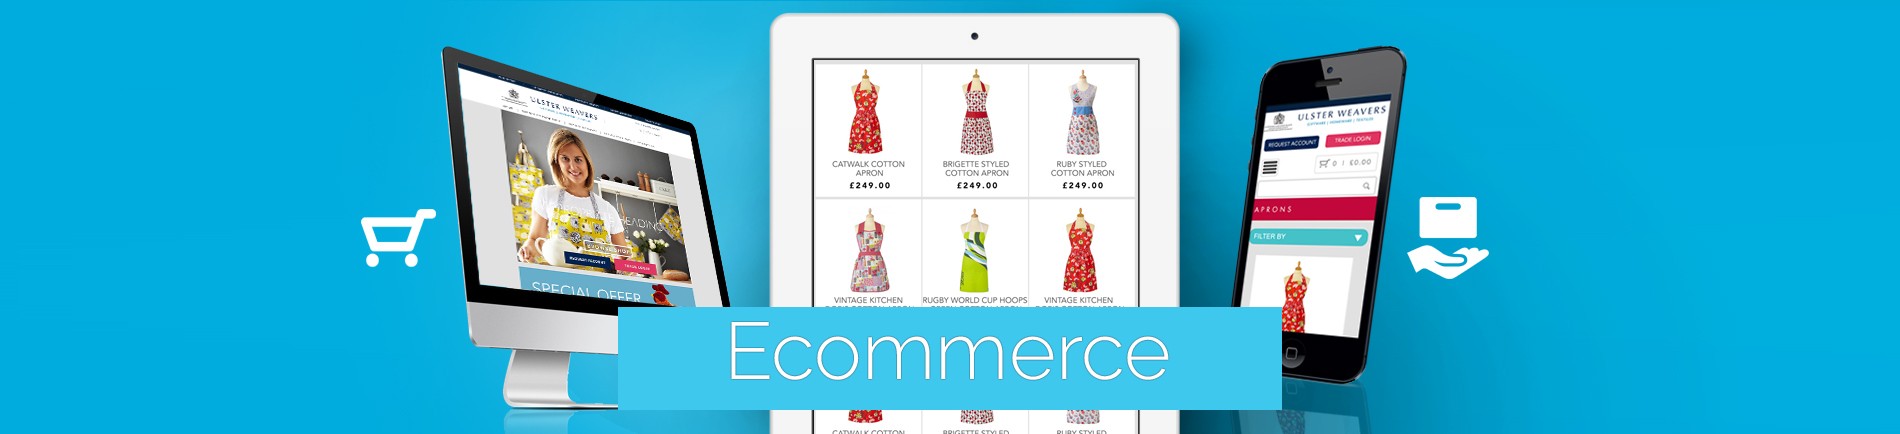 7 Things Successful Ecommerce Websites Have in Common